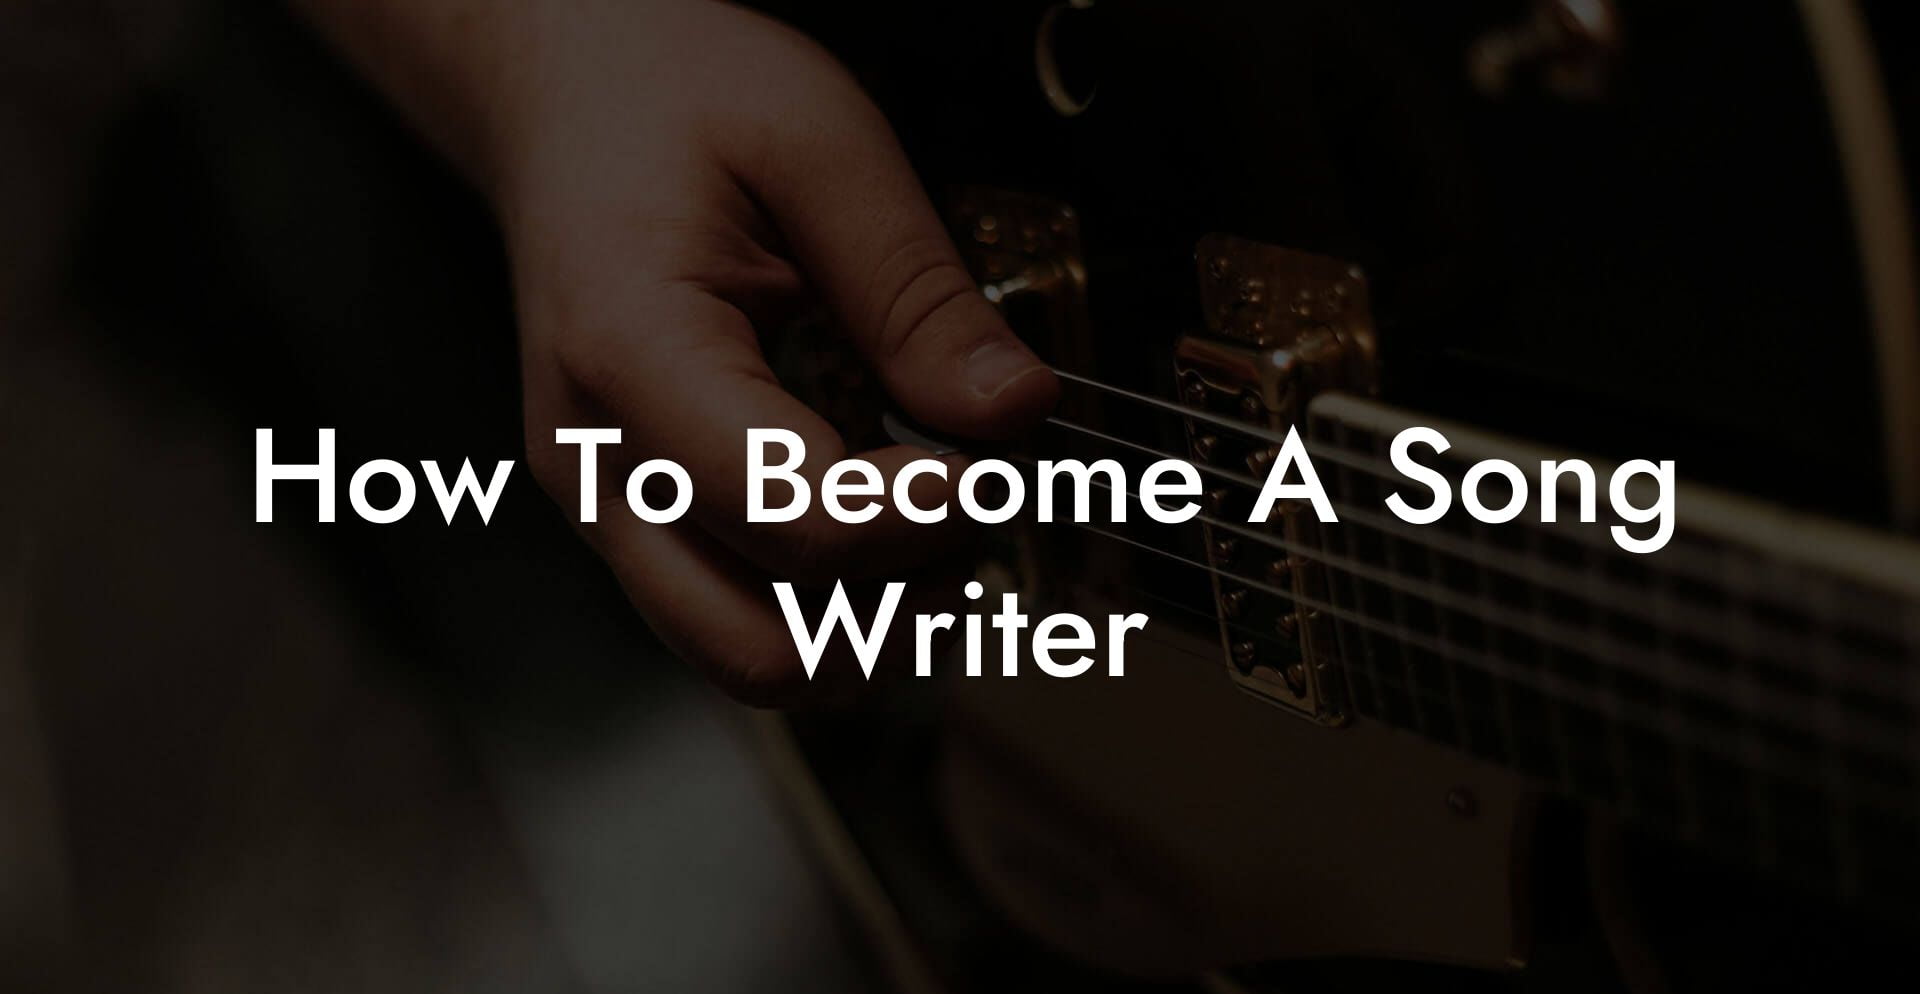 how to become a song writer lyric assistant